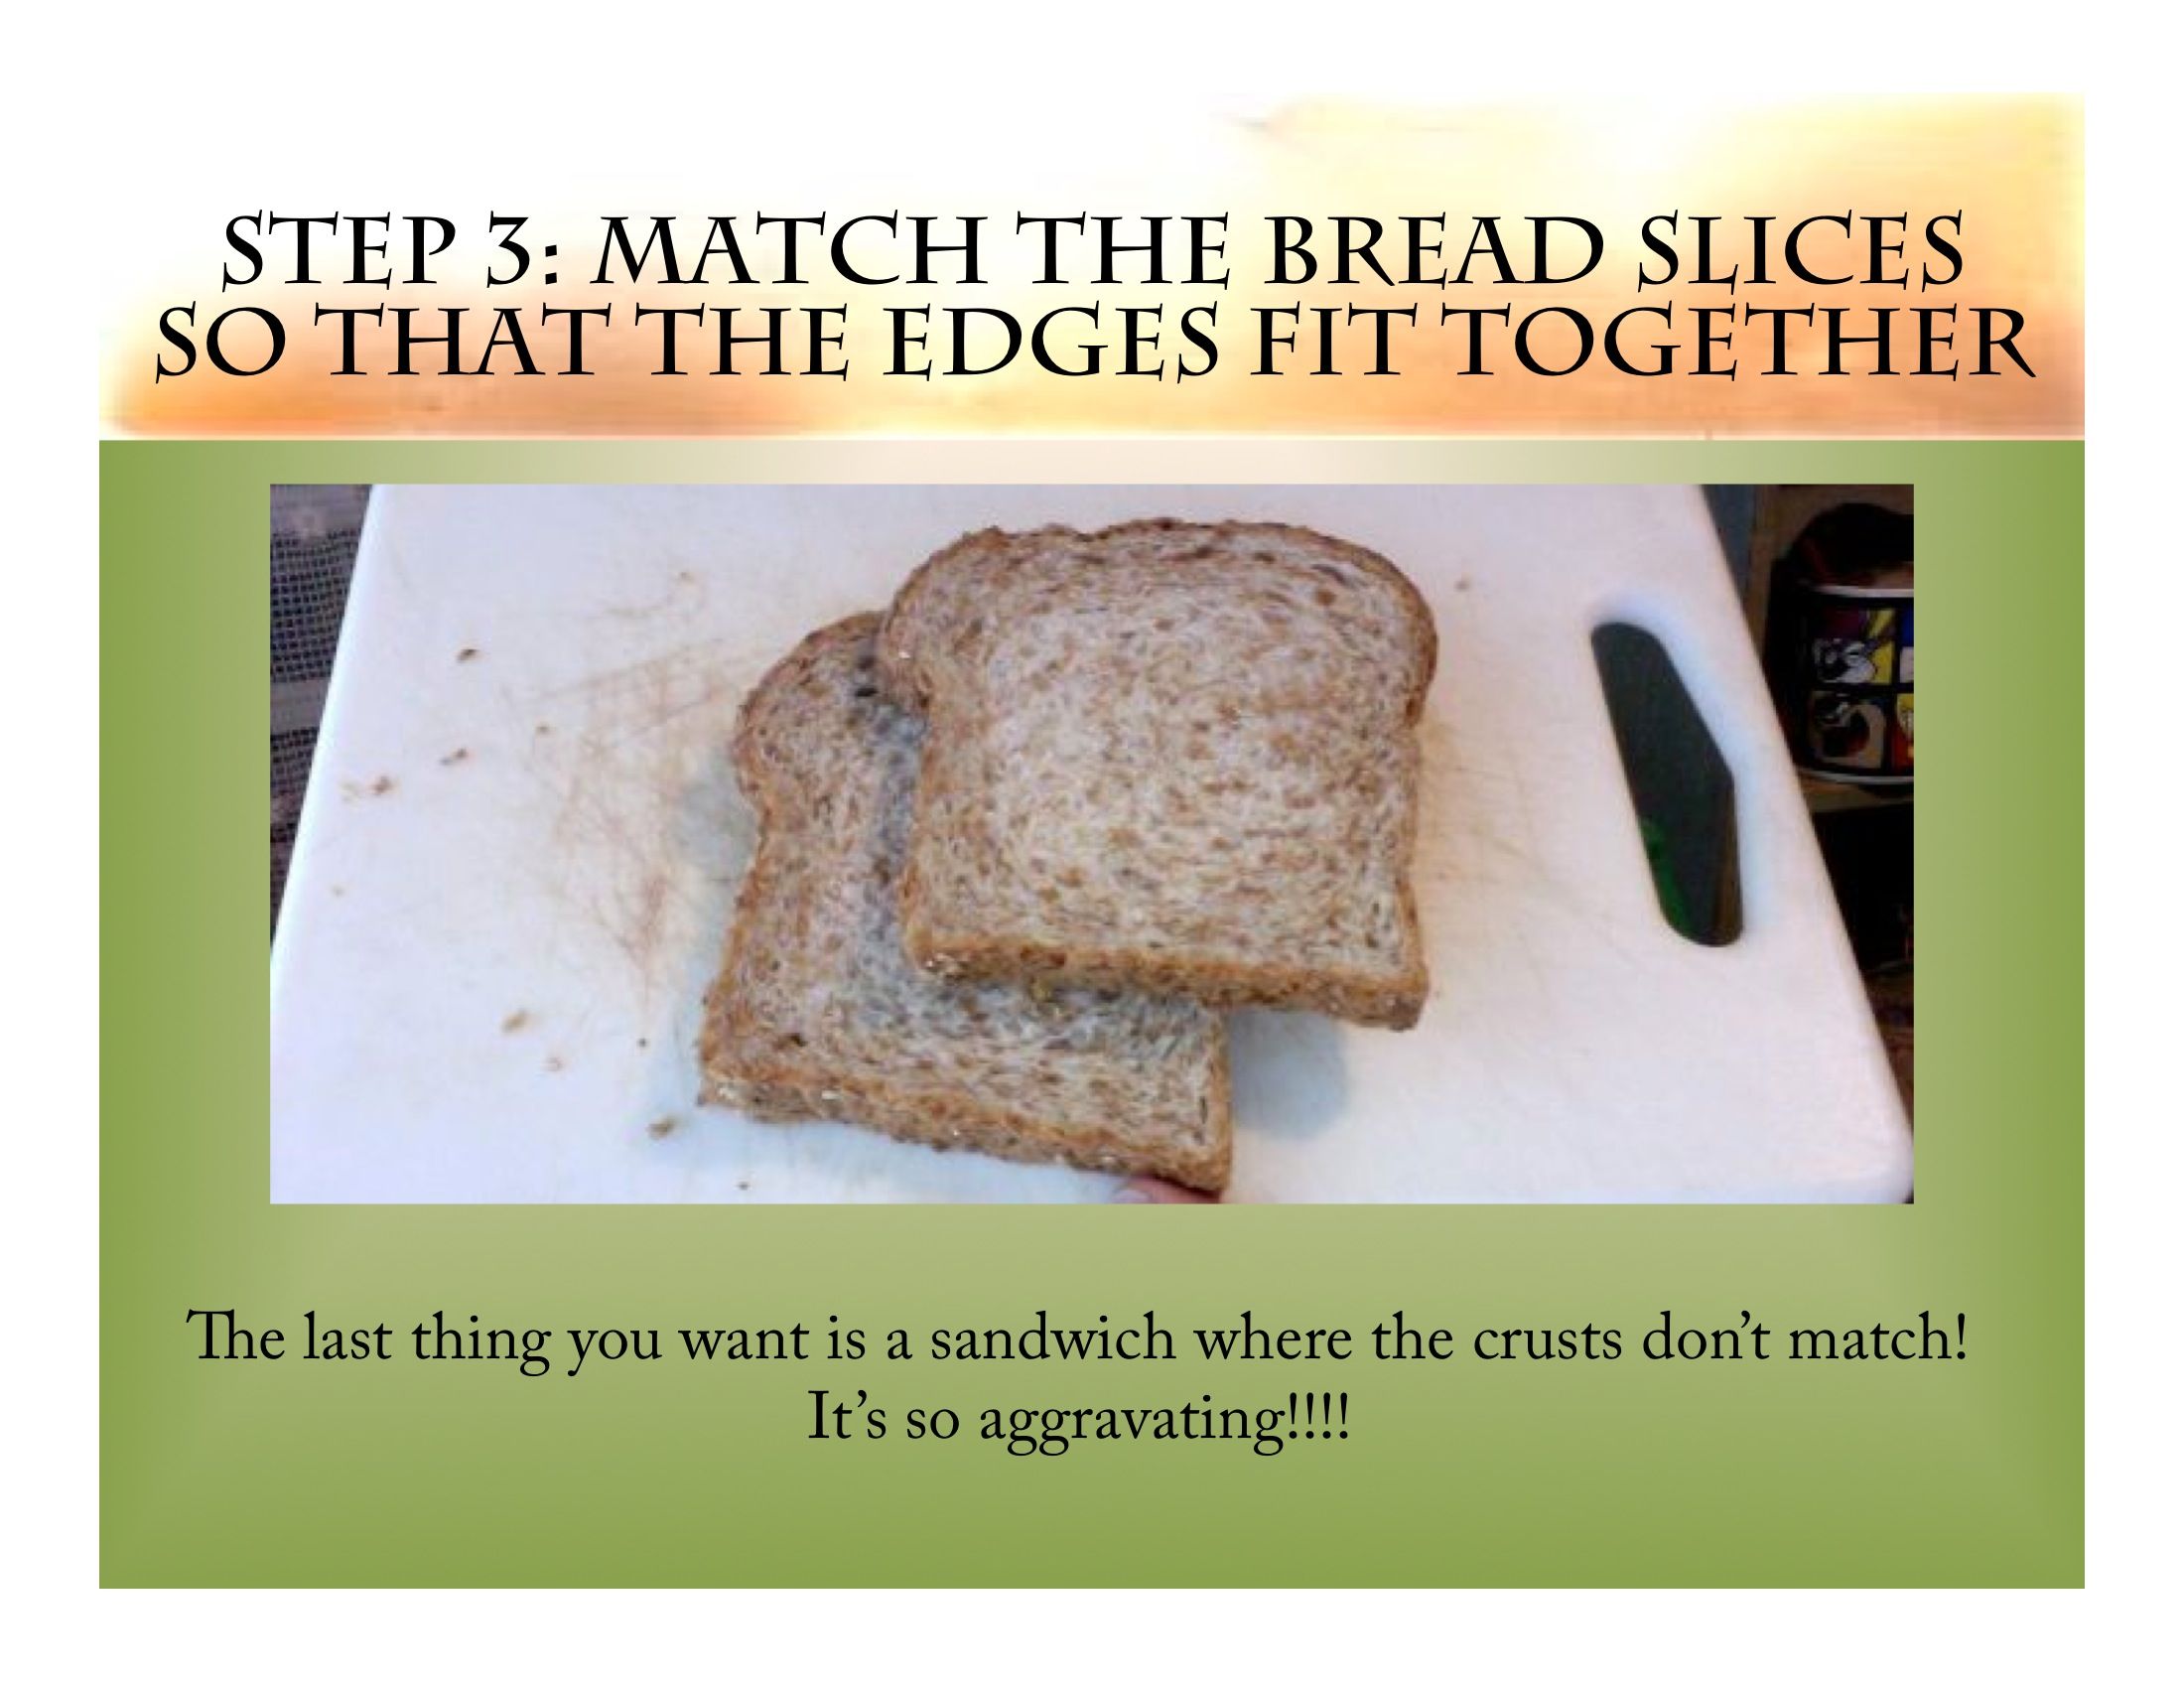 Step 3: Match Slices of Bread